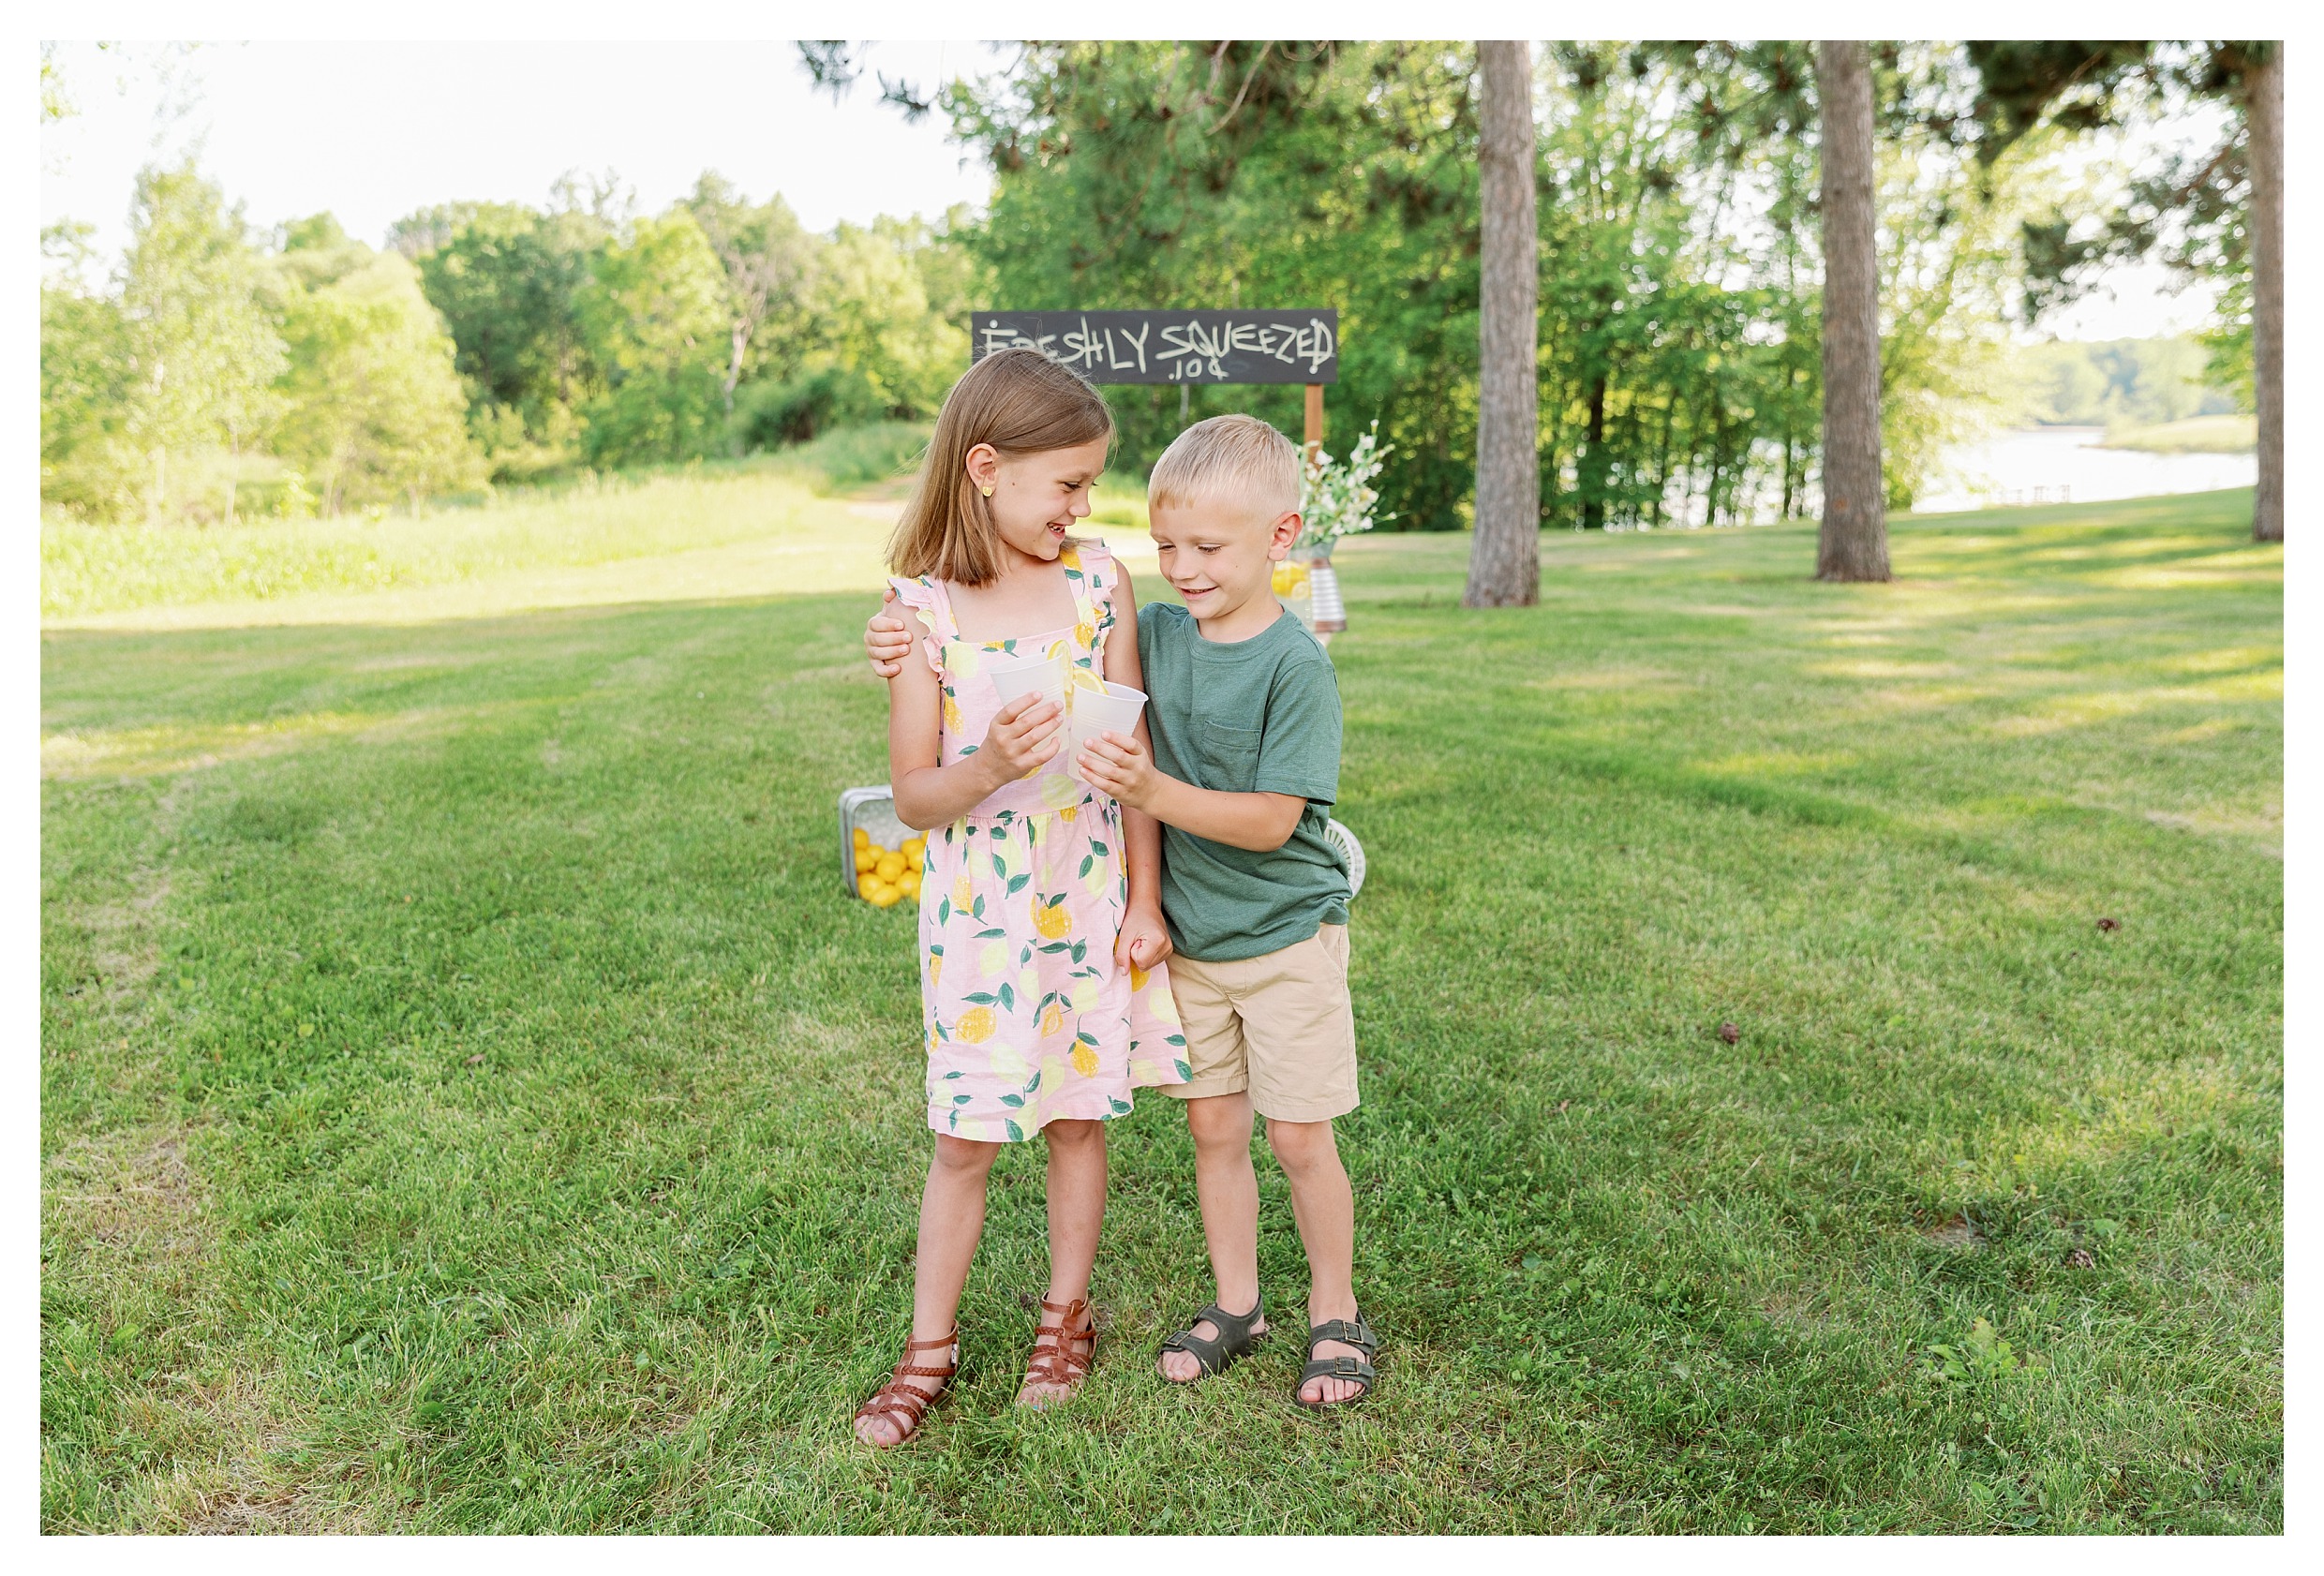 brother and sister pose during their lemonade stand mini session in Wausau, WI at Sunnyvale Park with their lemonade